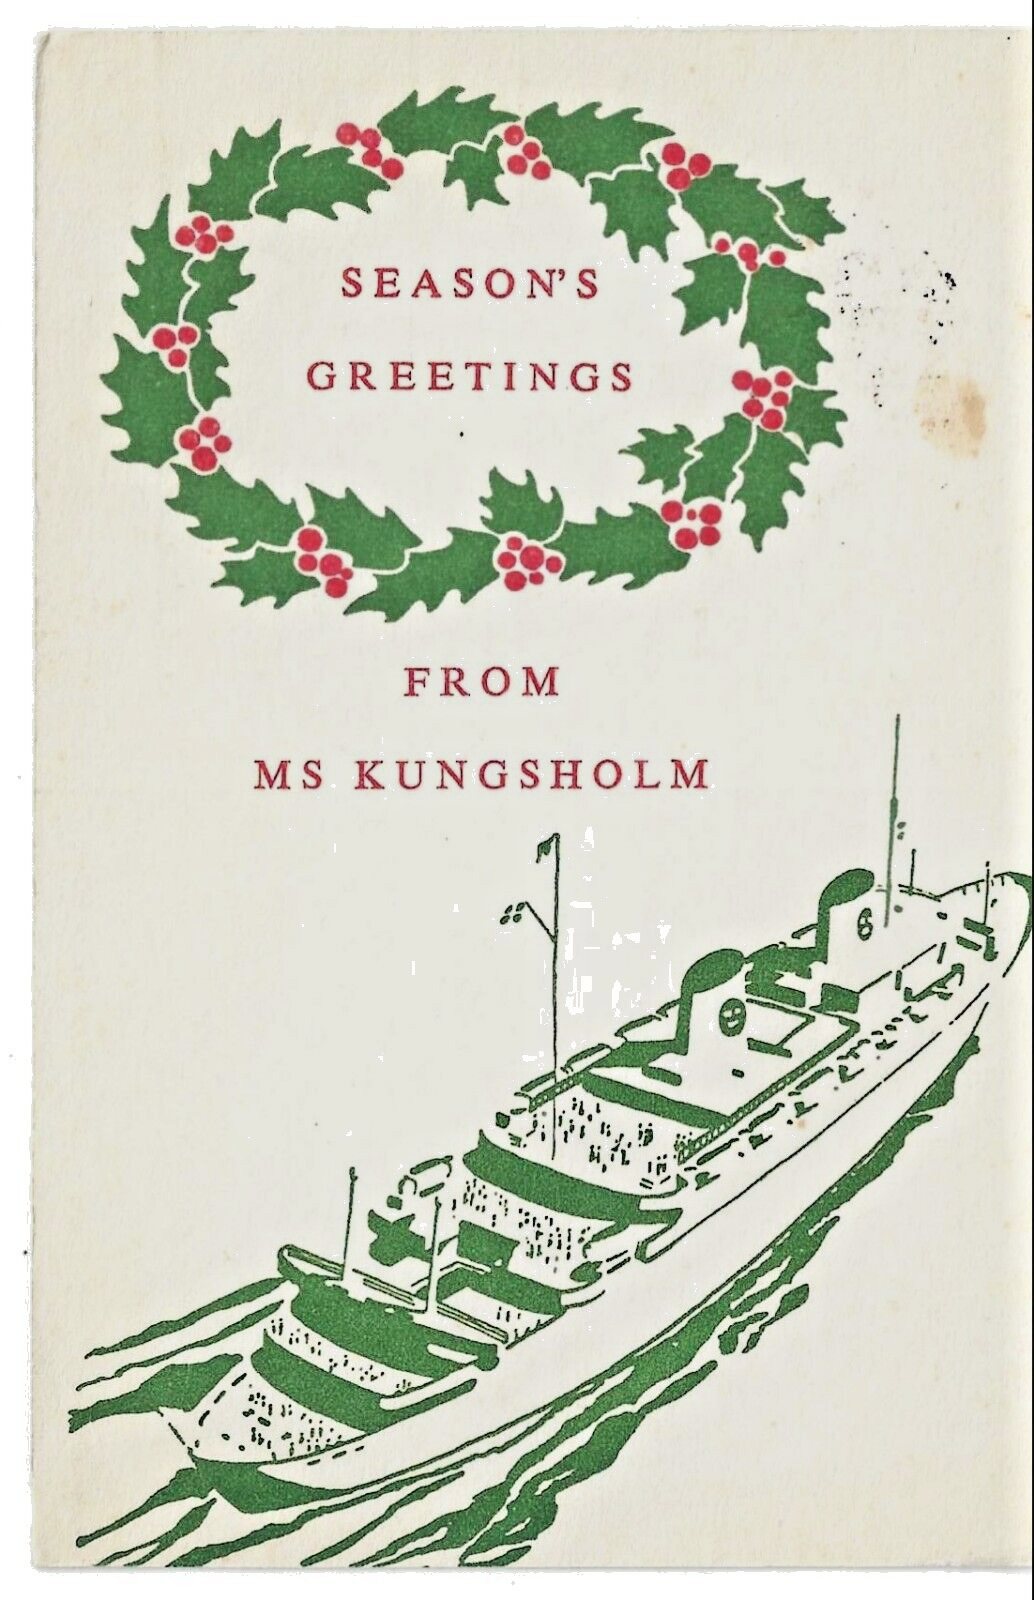 18. Seasons Greetings from MS Kungsholm posted on Board in 1956